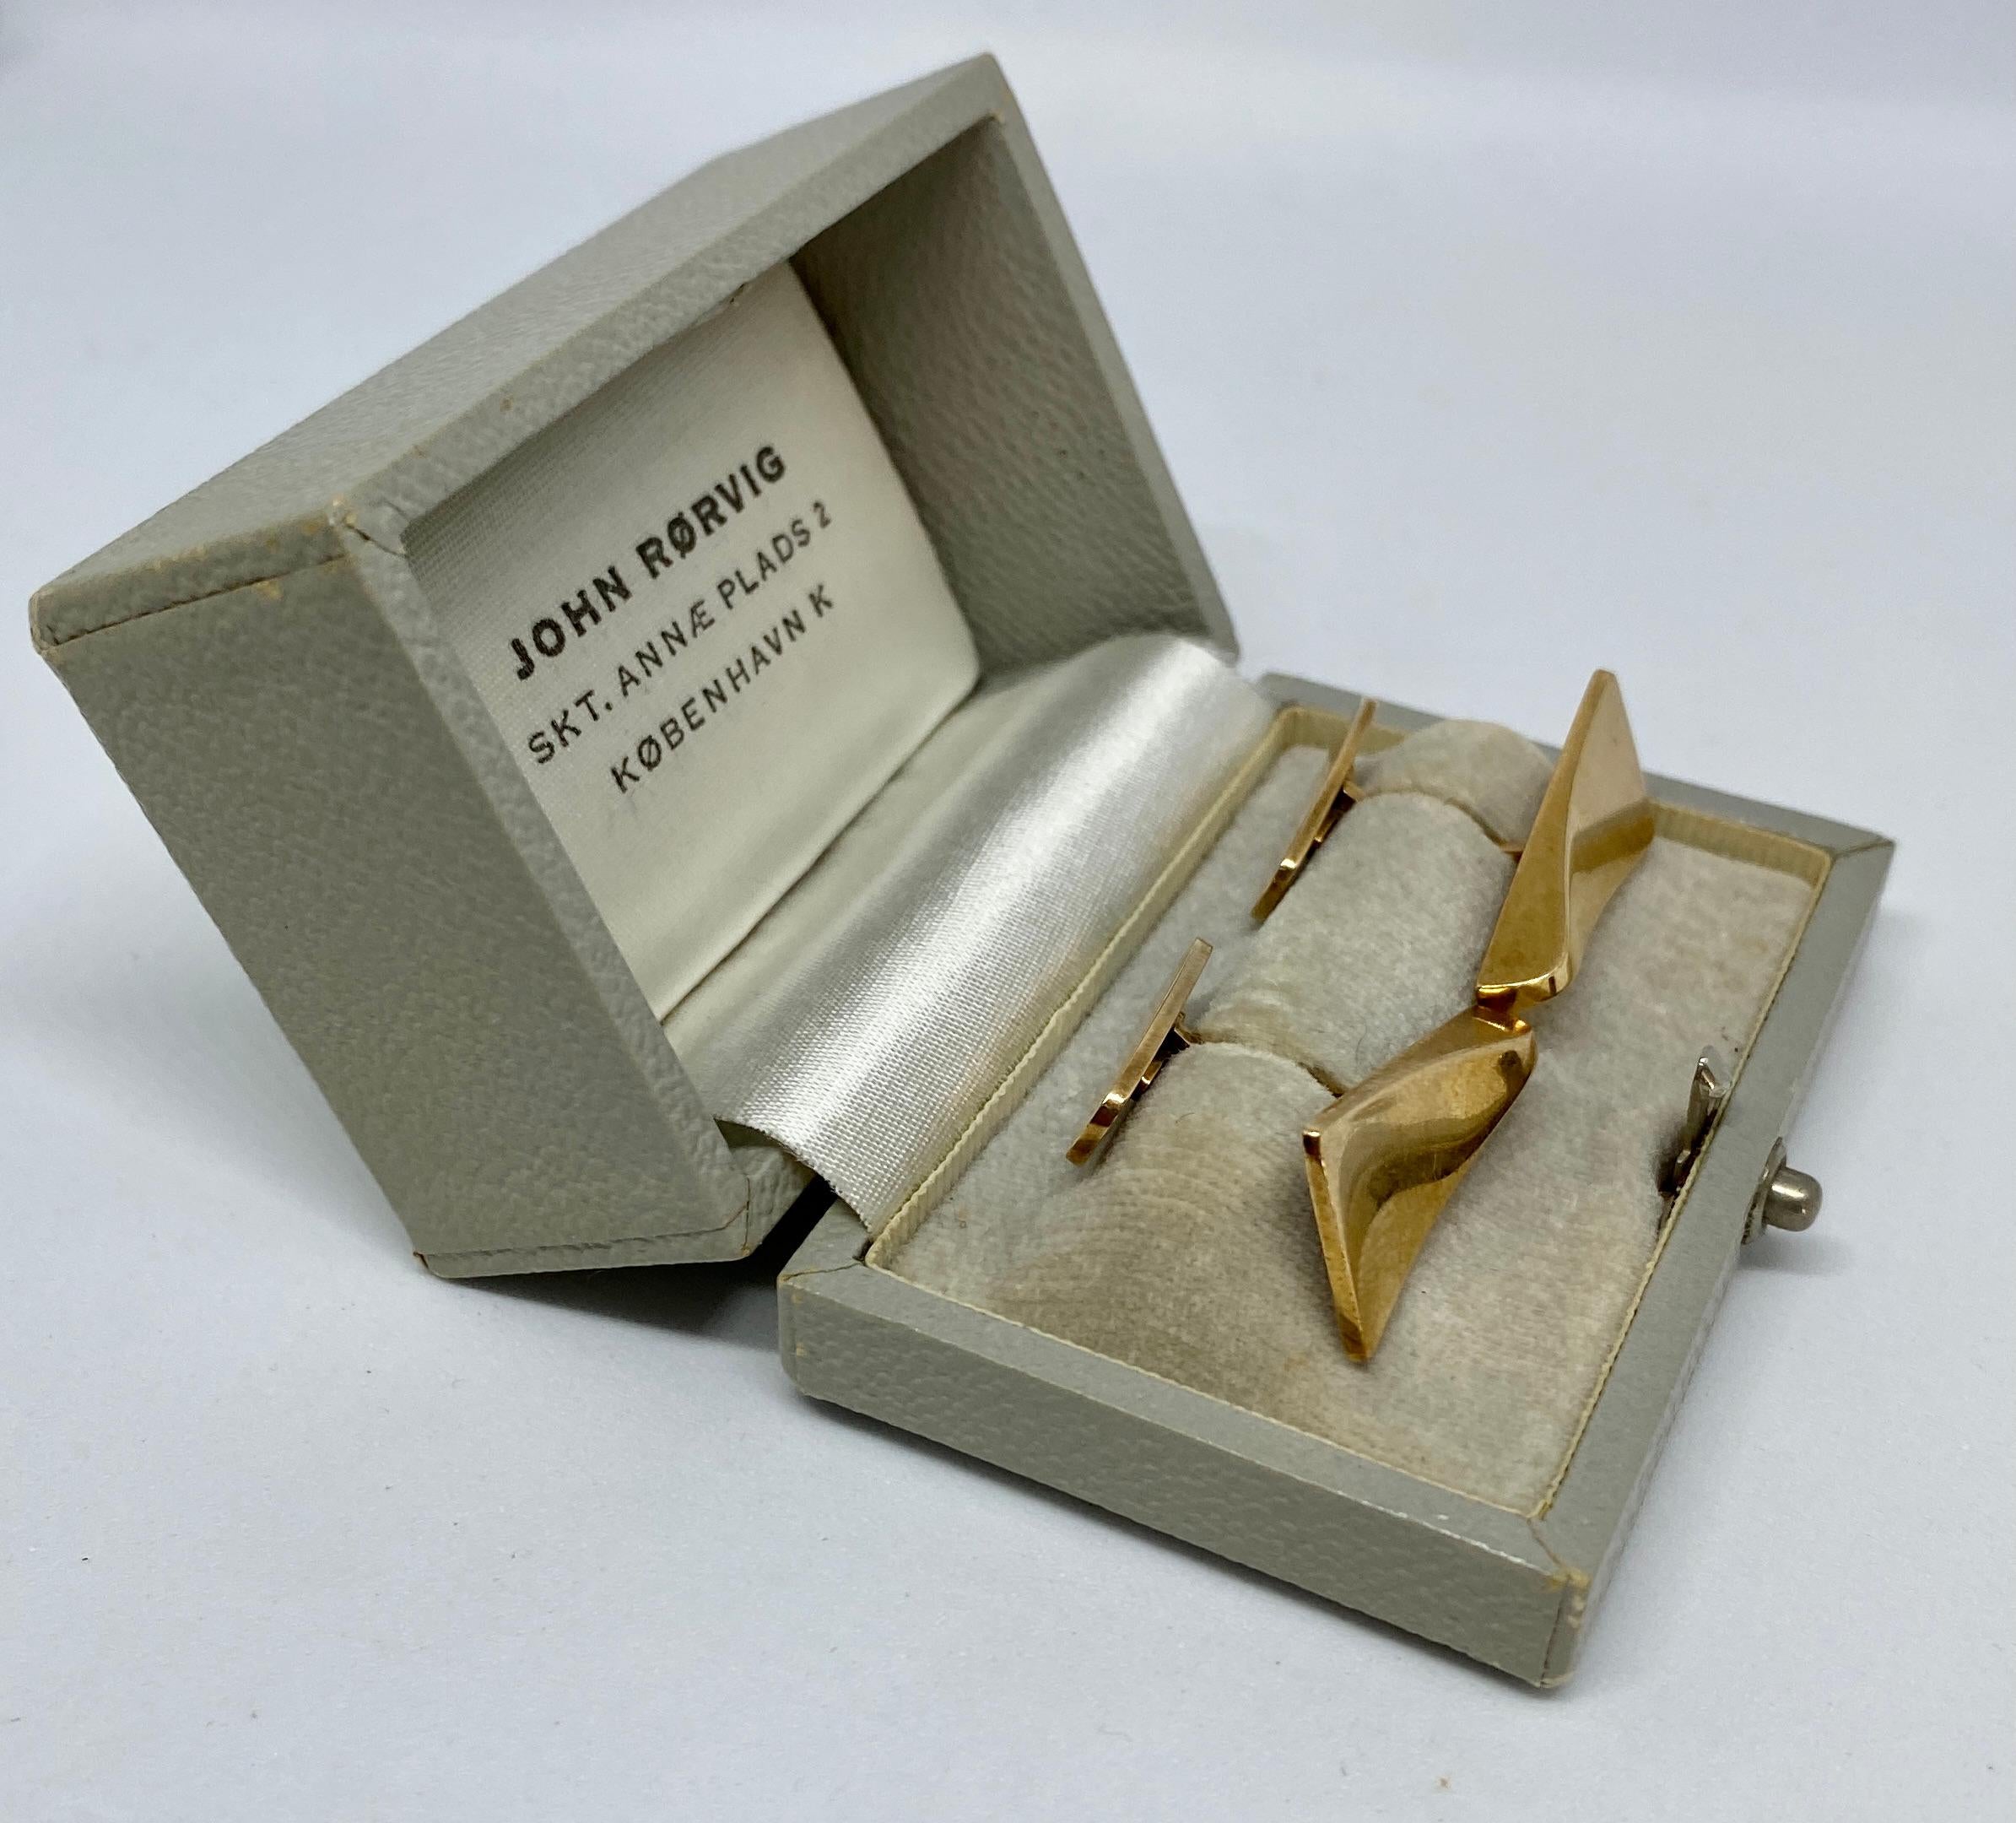 Fantastic and extremely rare cufflinks by John Rørvig of Copenhagen. 

Rendered in solid, 14K yellow gold, the cufflinks are in excellent vintage condition and come with their original, fitted box. 

The cufflink faces measure 26.6mm long and taper